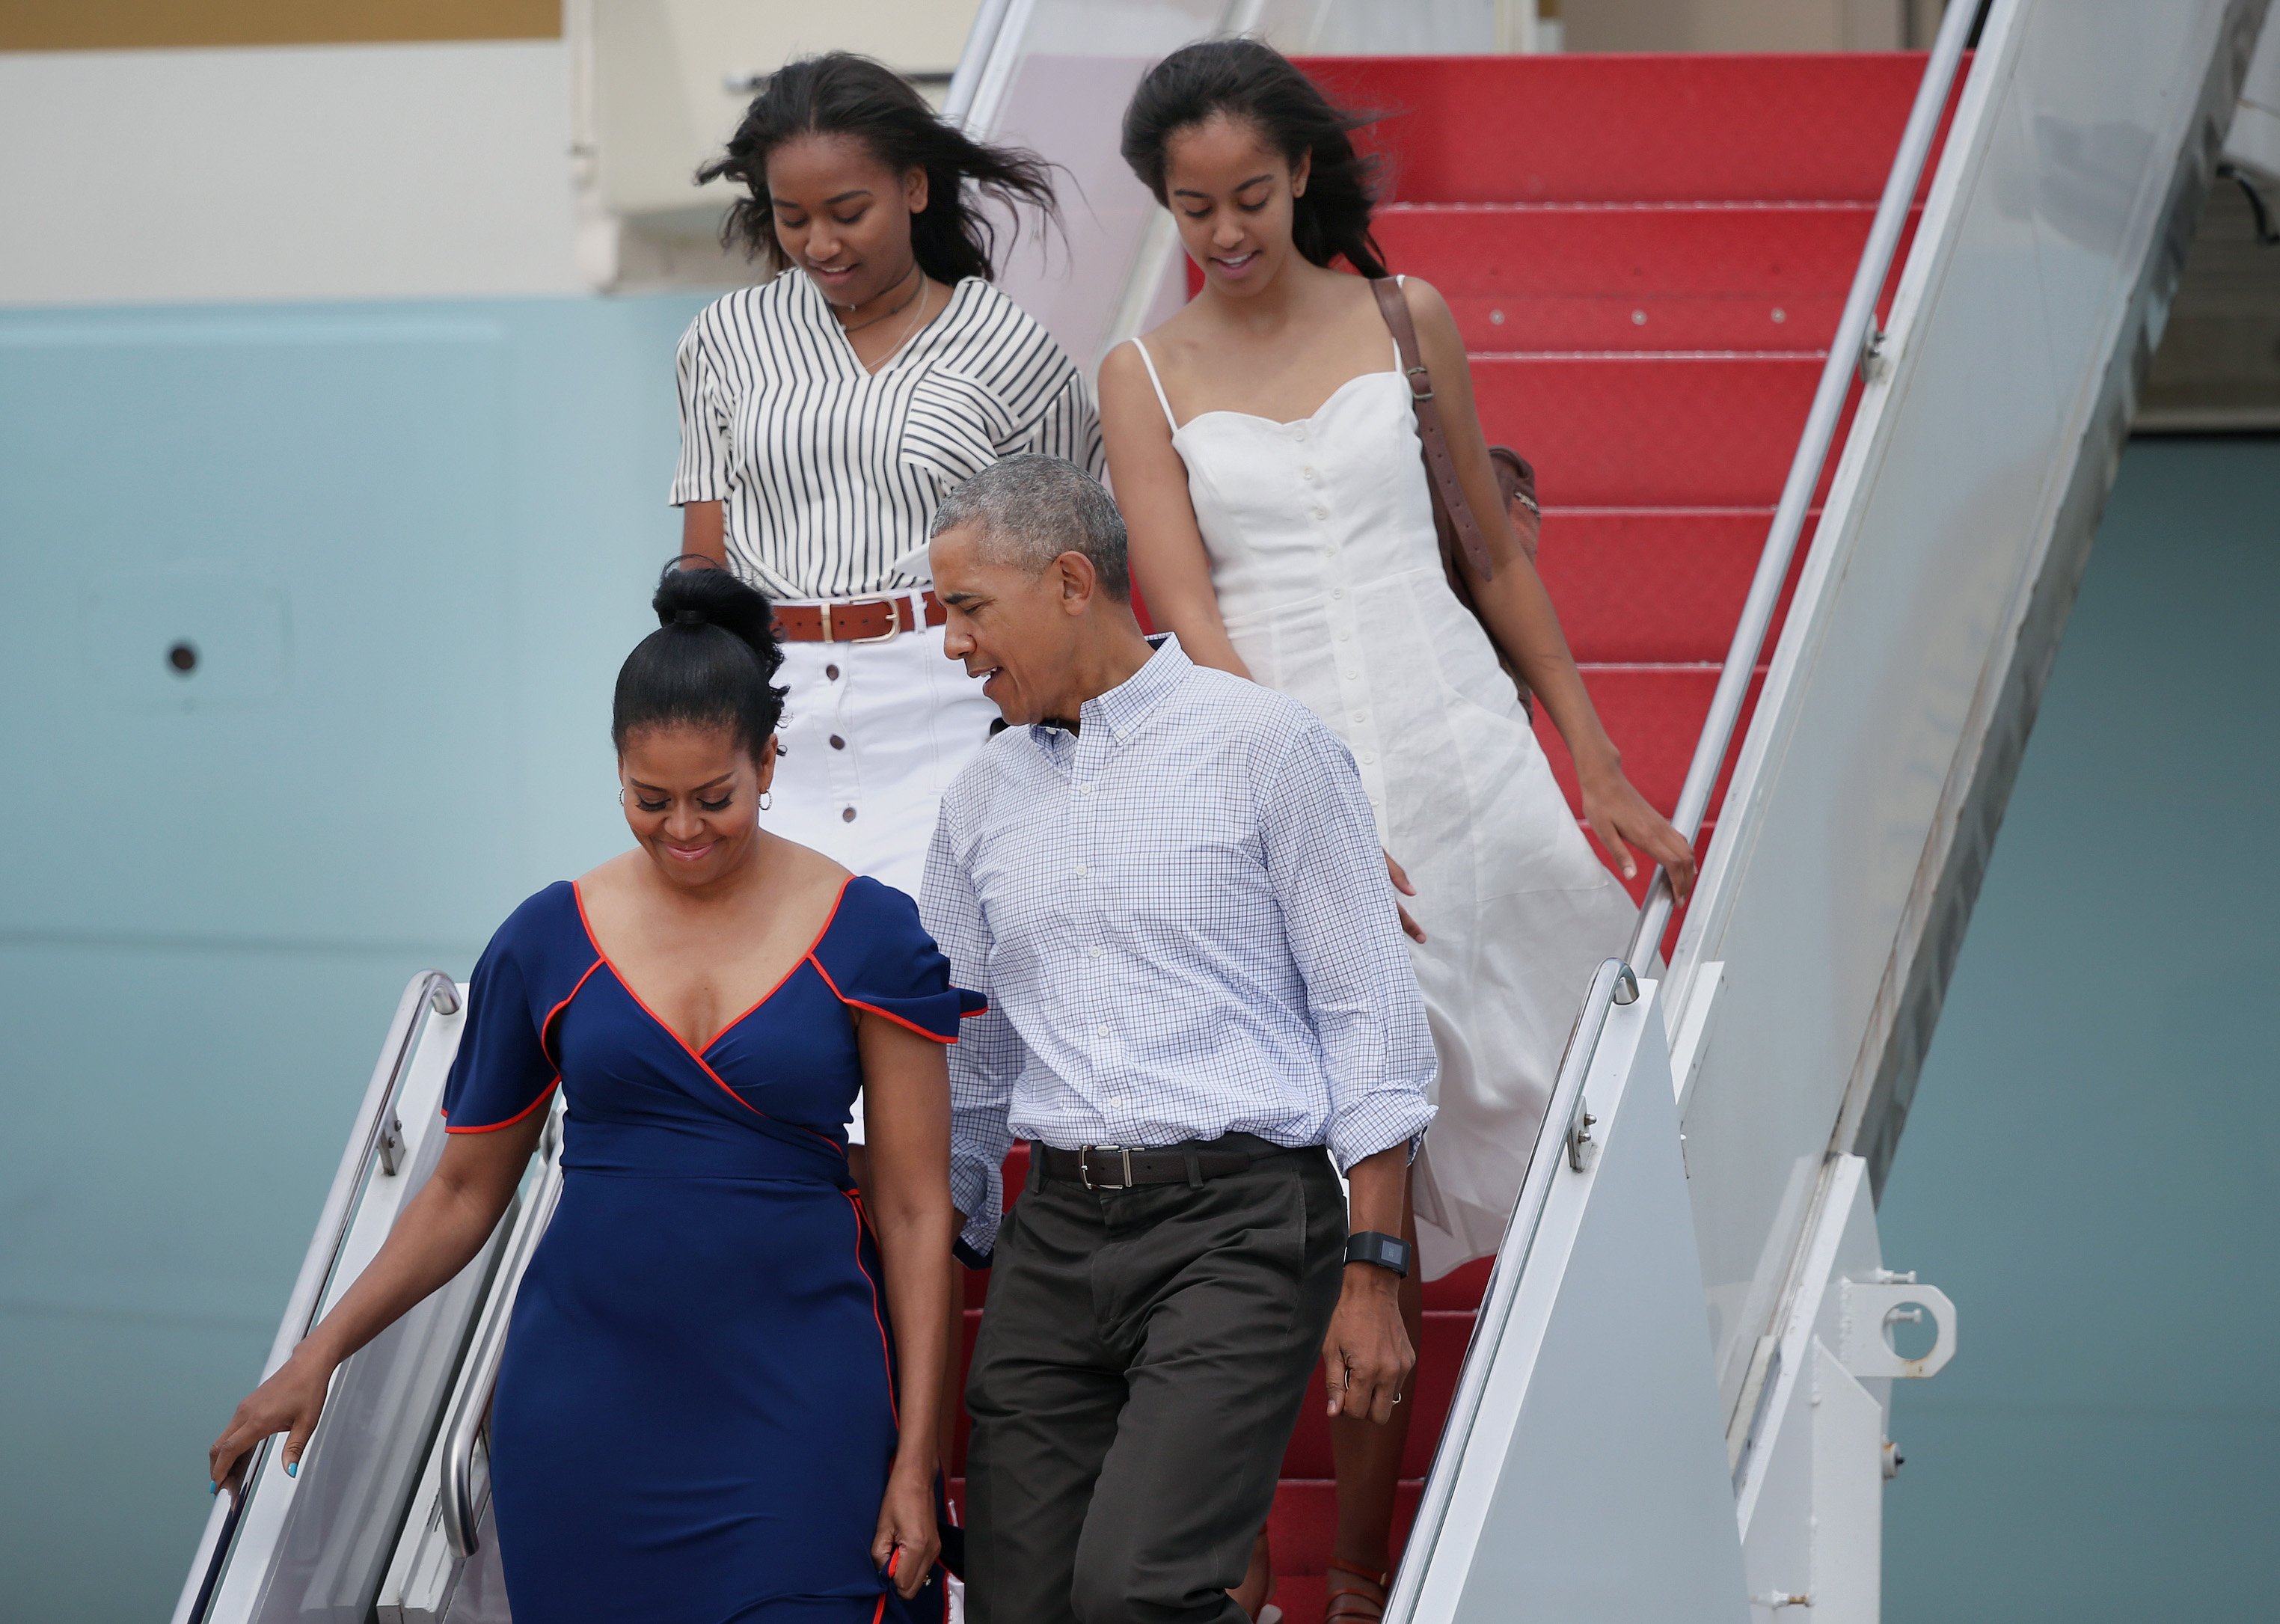 Barack Obama, First Lady Michelle Obama, and their daughters, Sasha and Malia, step off Air Force One at Joint Base Cape Cod to take Marine One to Martha's Vineyard for a vacation, August 6, 2016. | Source: Getty Images